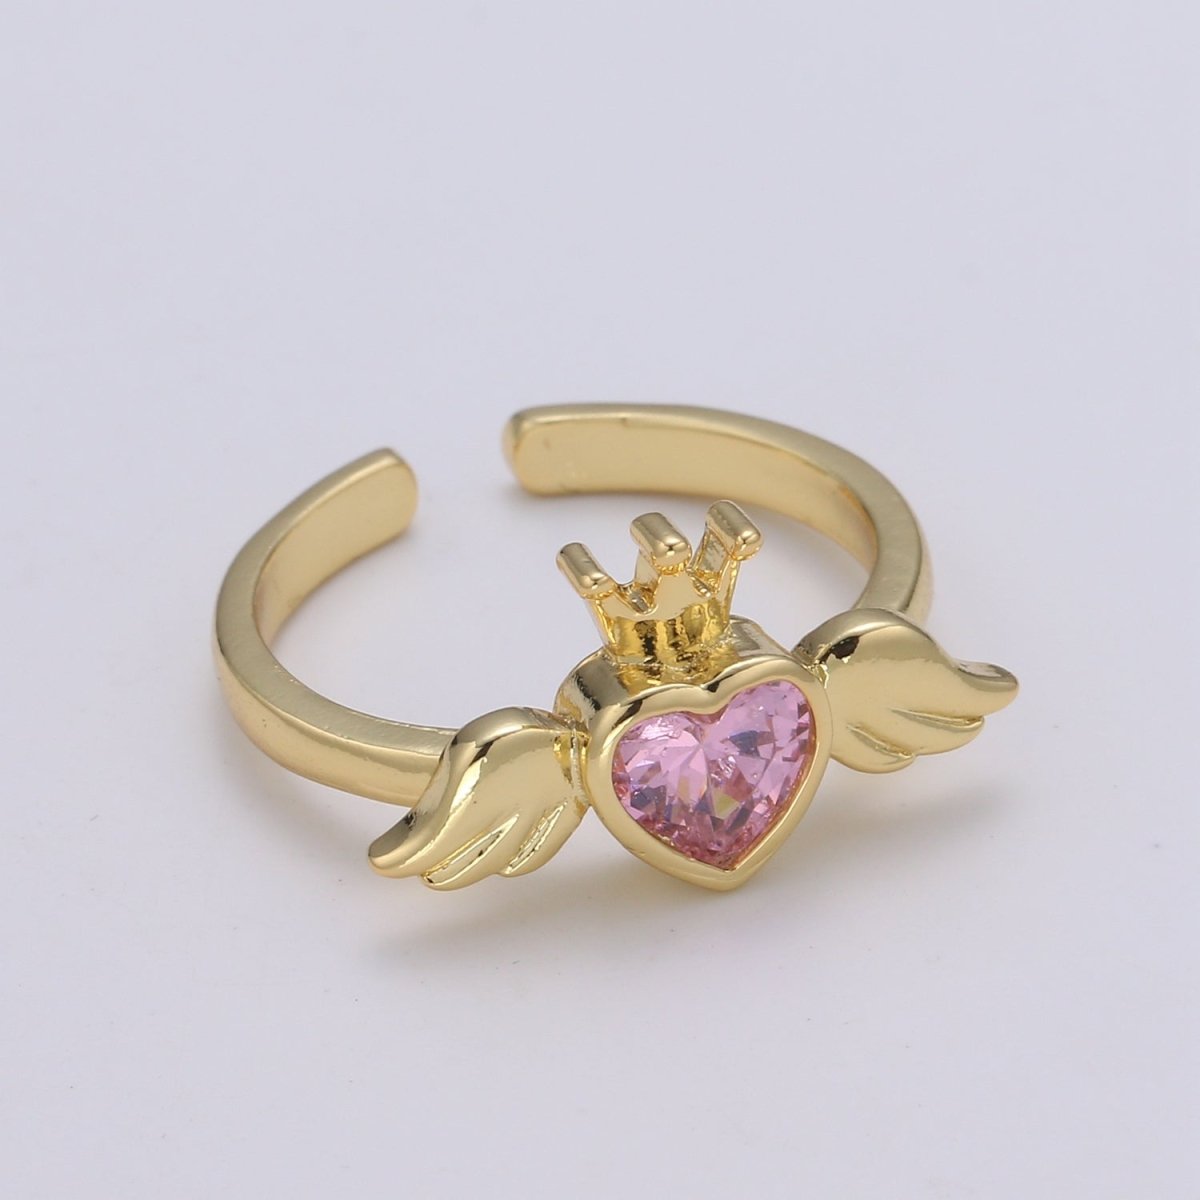 24K Gold Filled Romantic Heart Love Wings Adjustable Ring - R-310-311 - DLUXCA